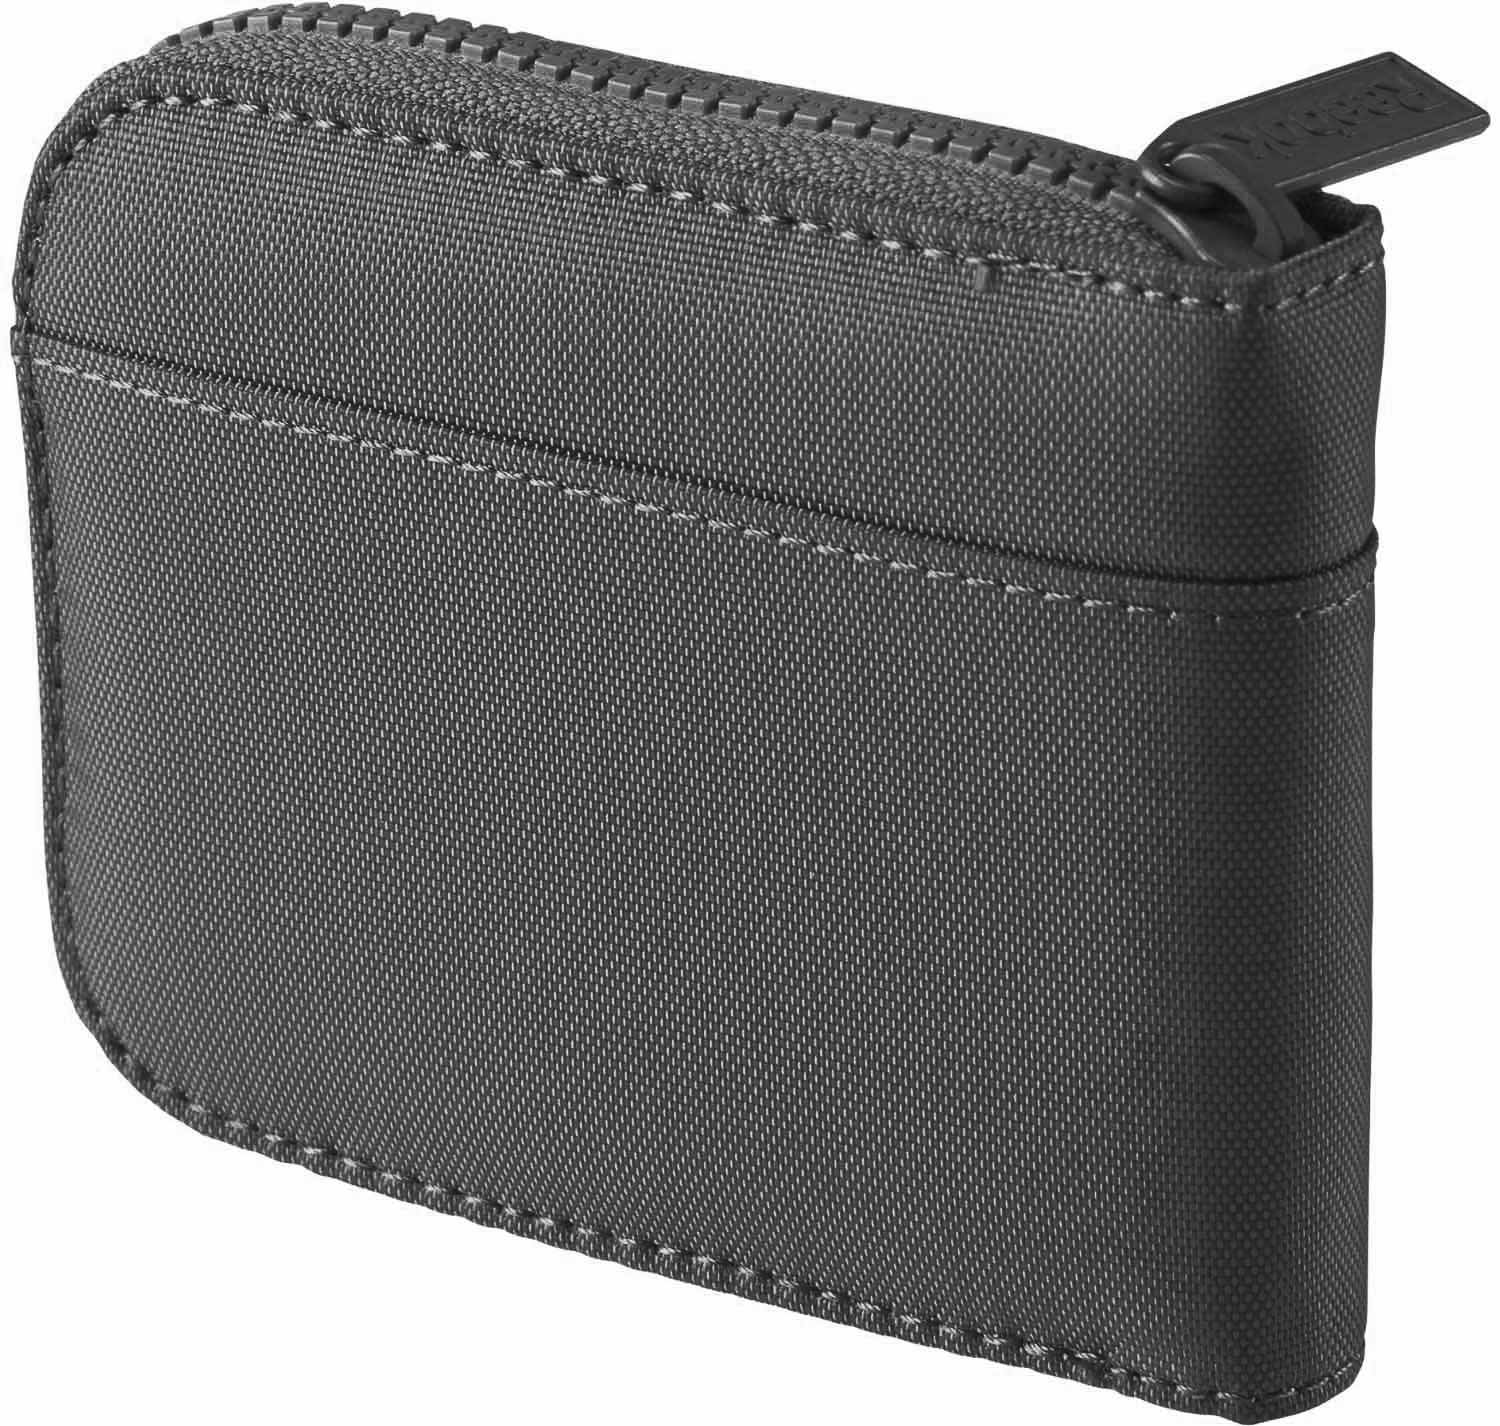 LIFESTYLE ESS WALLET - Wallet